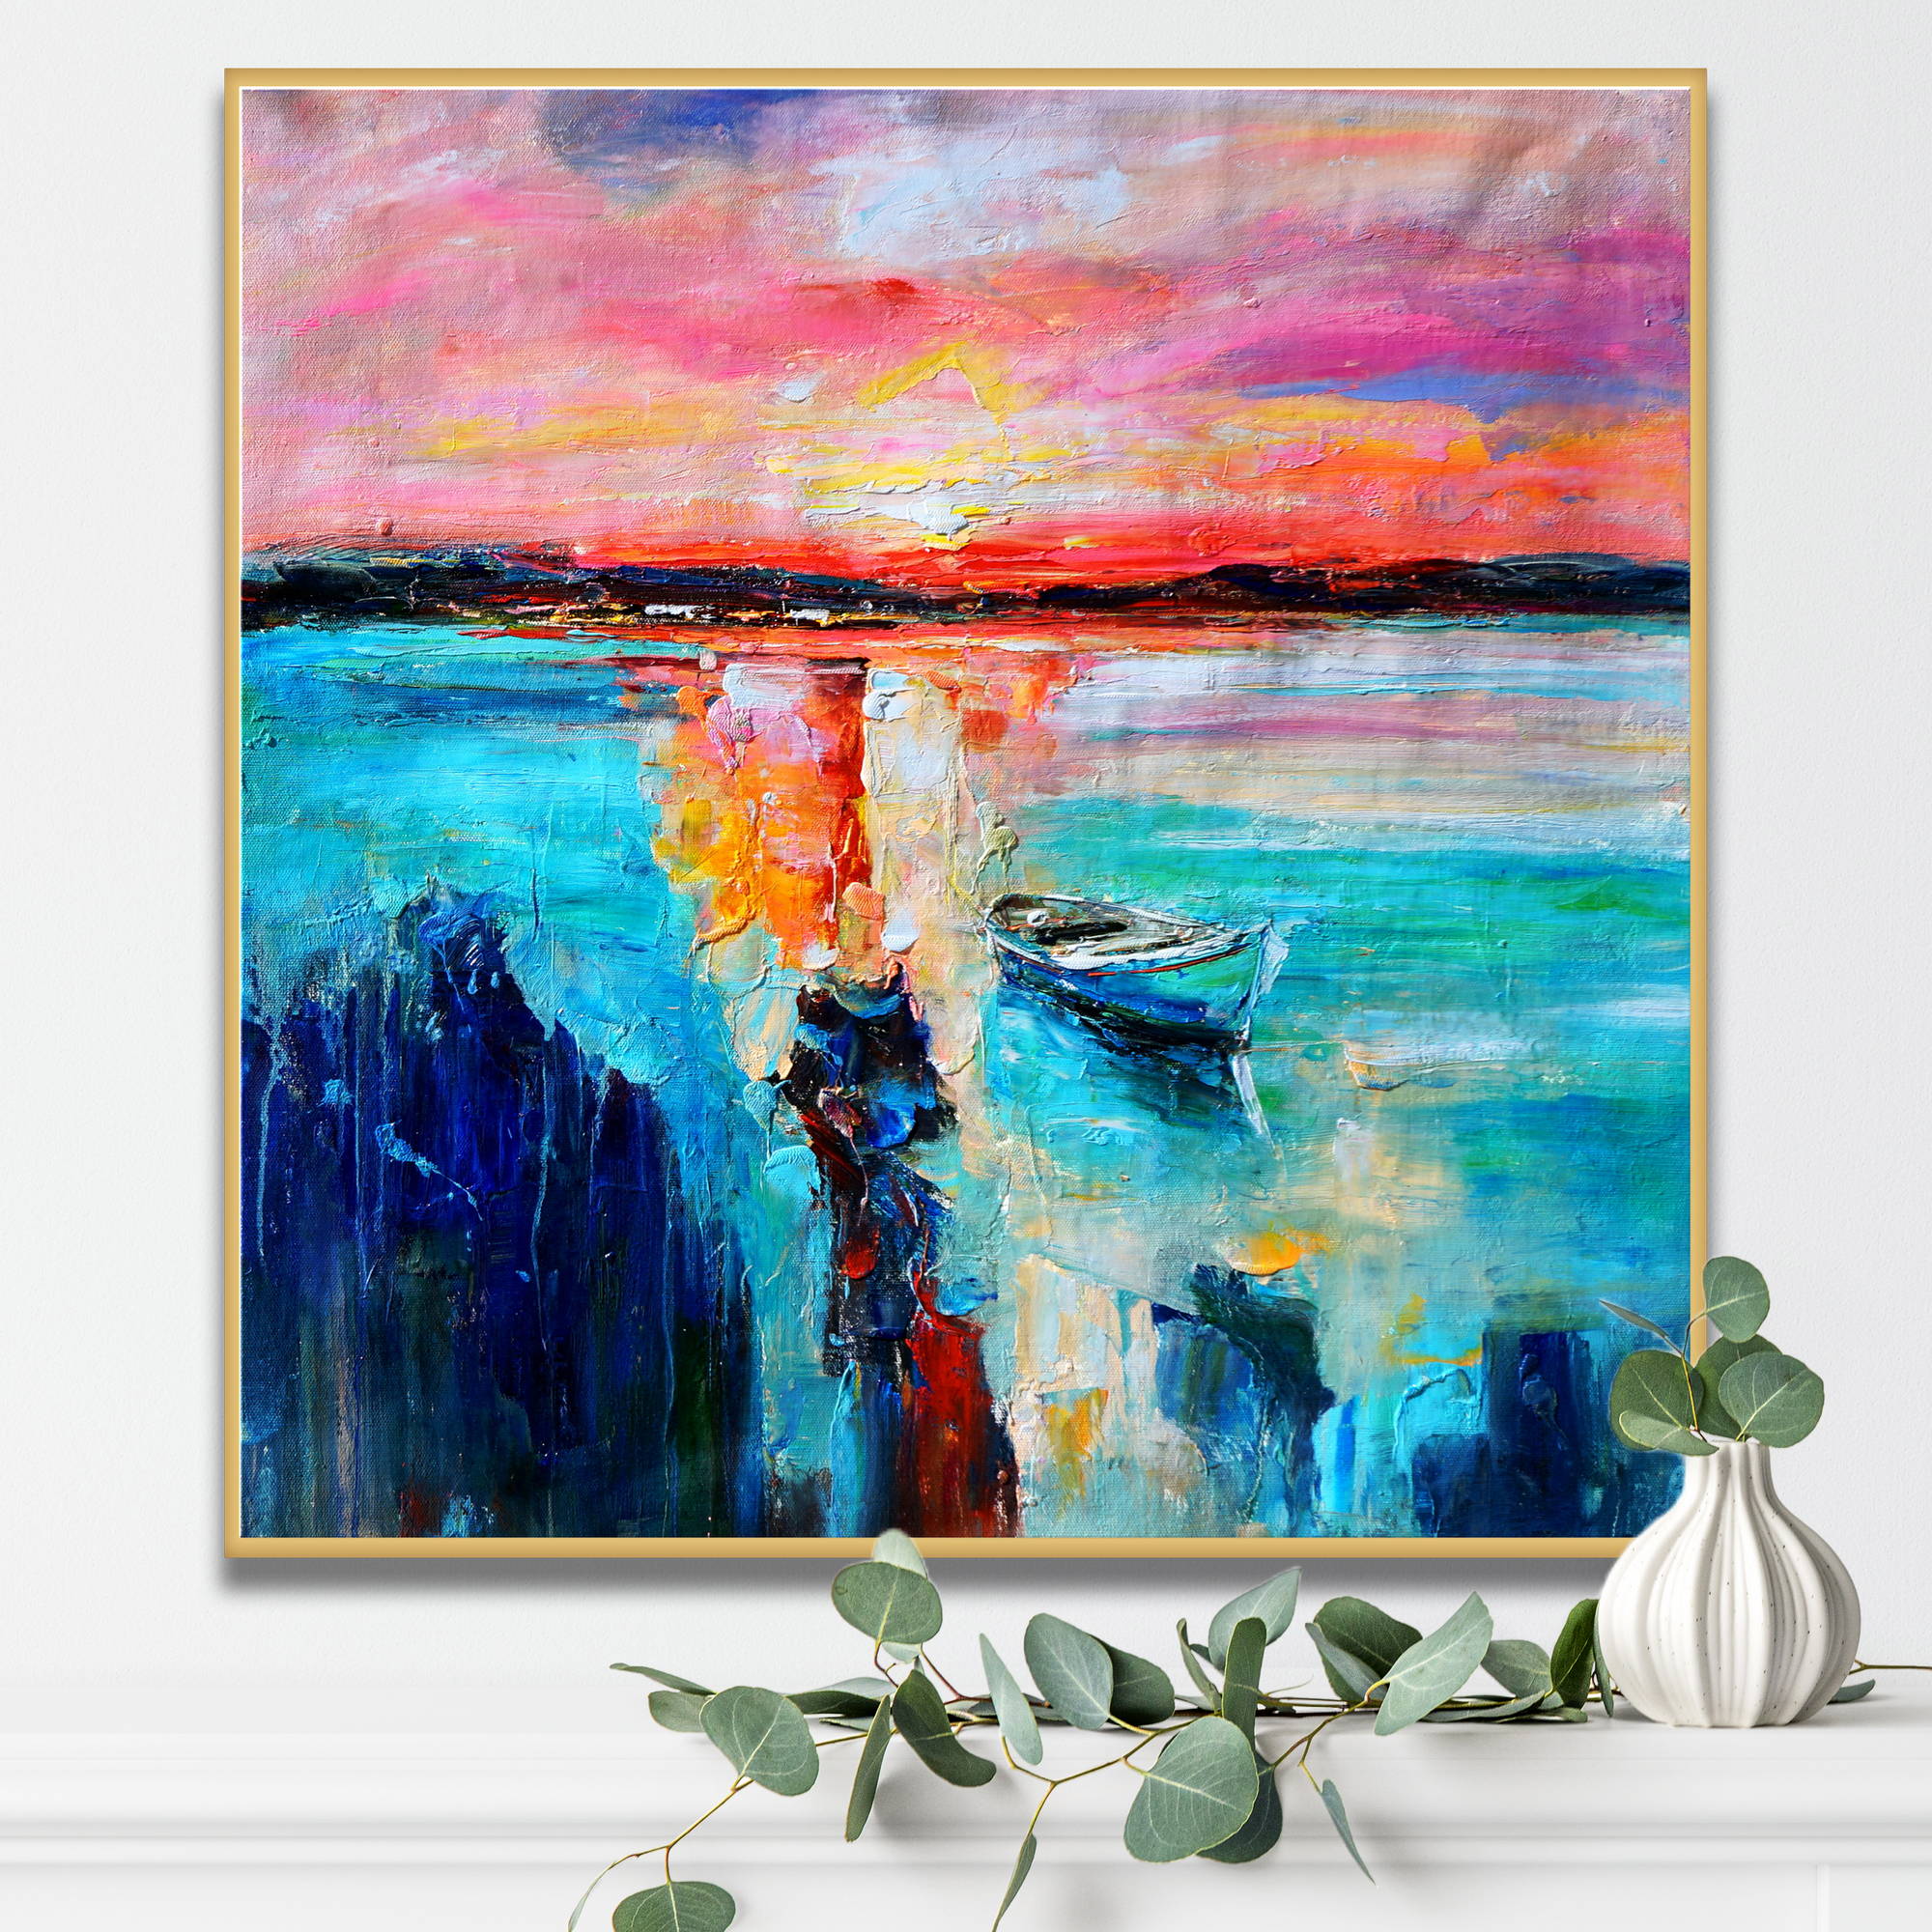 Abstract painting Marina at Sunset Bright colors 60x60cm